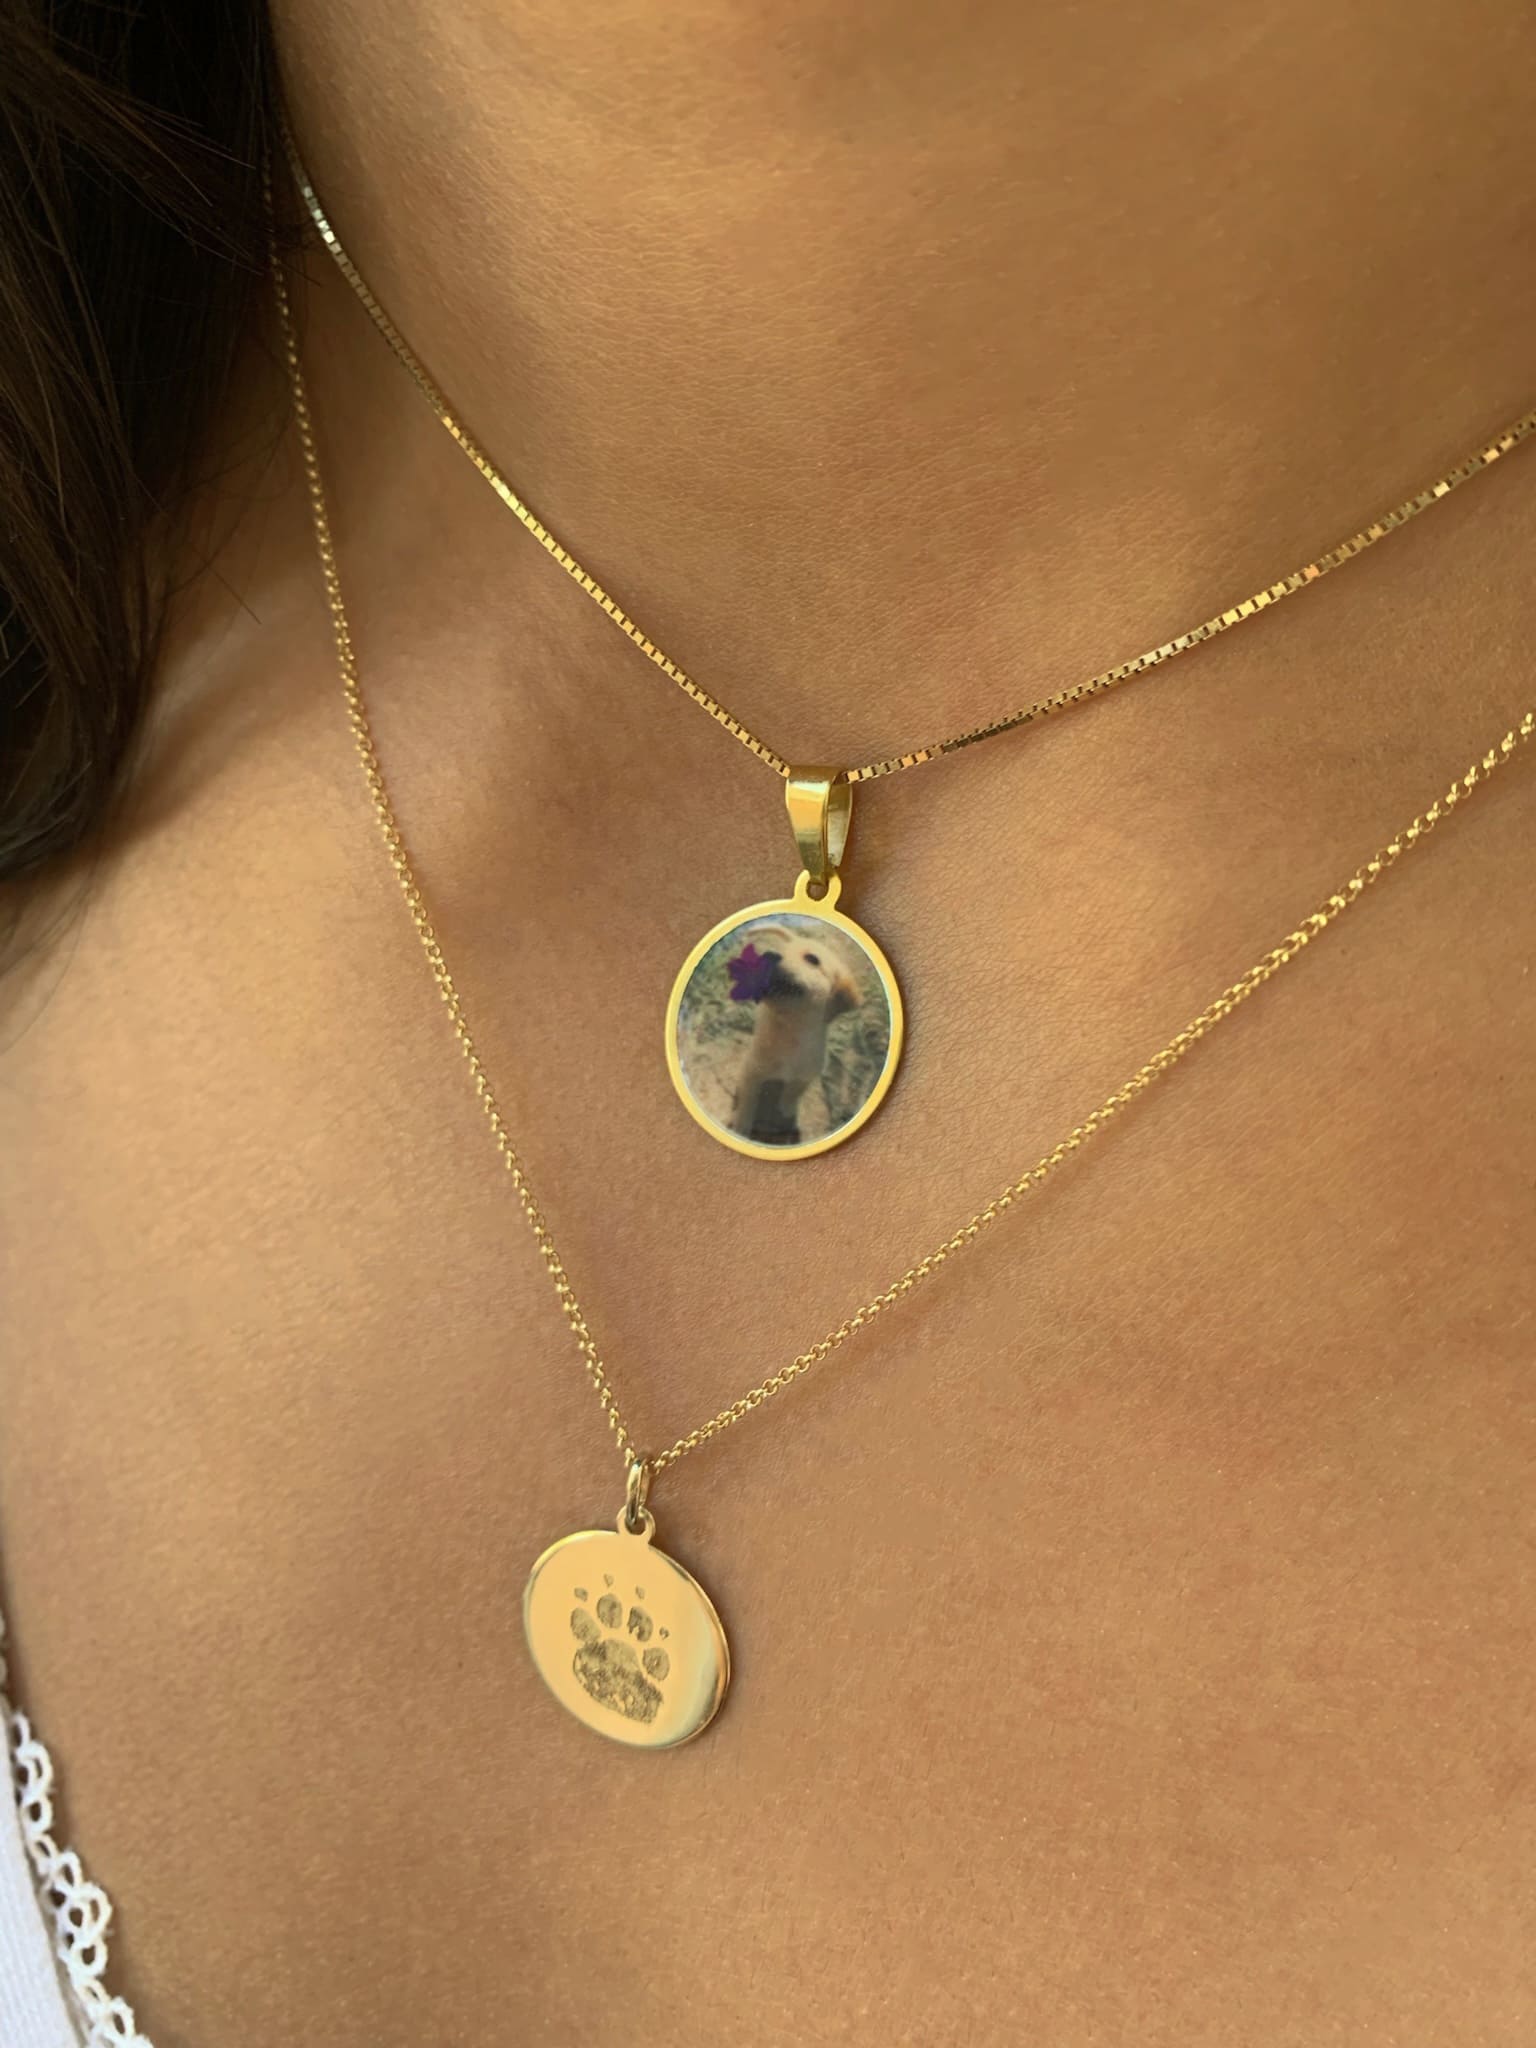 Paw Print Engraving Coin Necklace